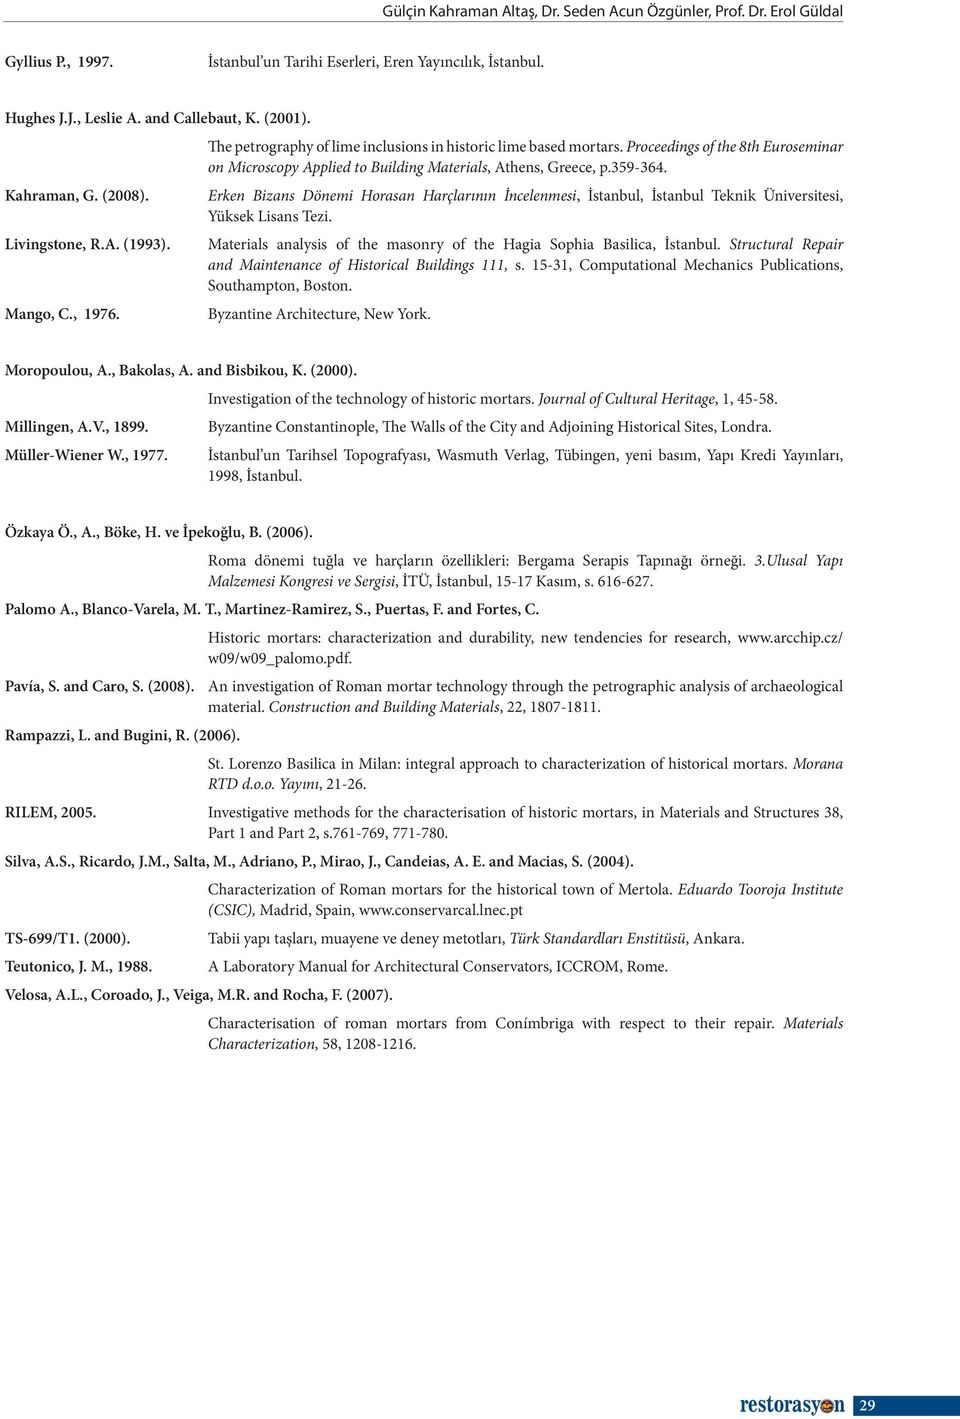 Proceedings of the 8th Euroseminar on Microscopy Applied to Building Materials, Athens, Greece, p.359-364.